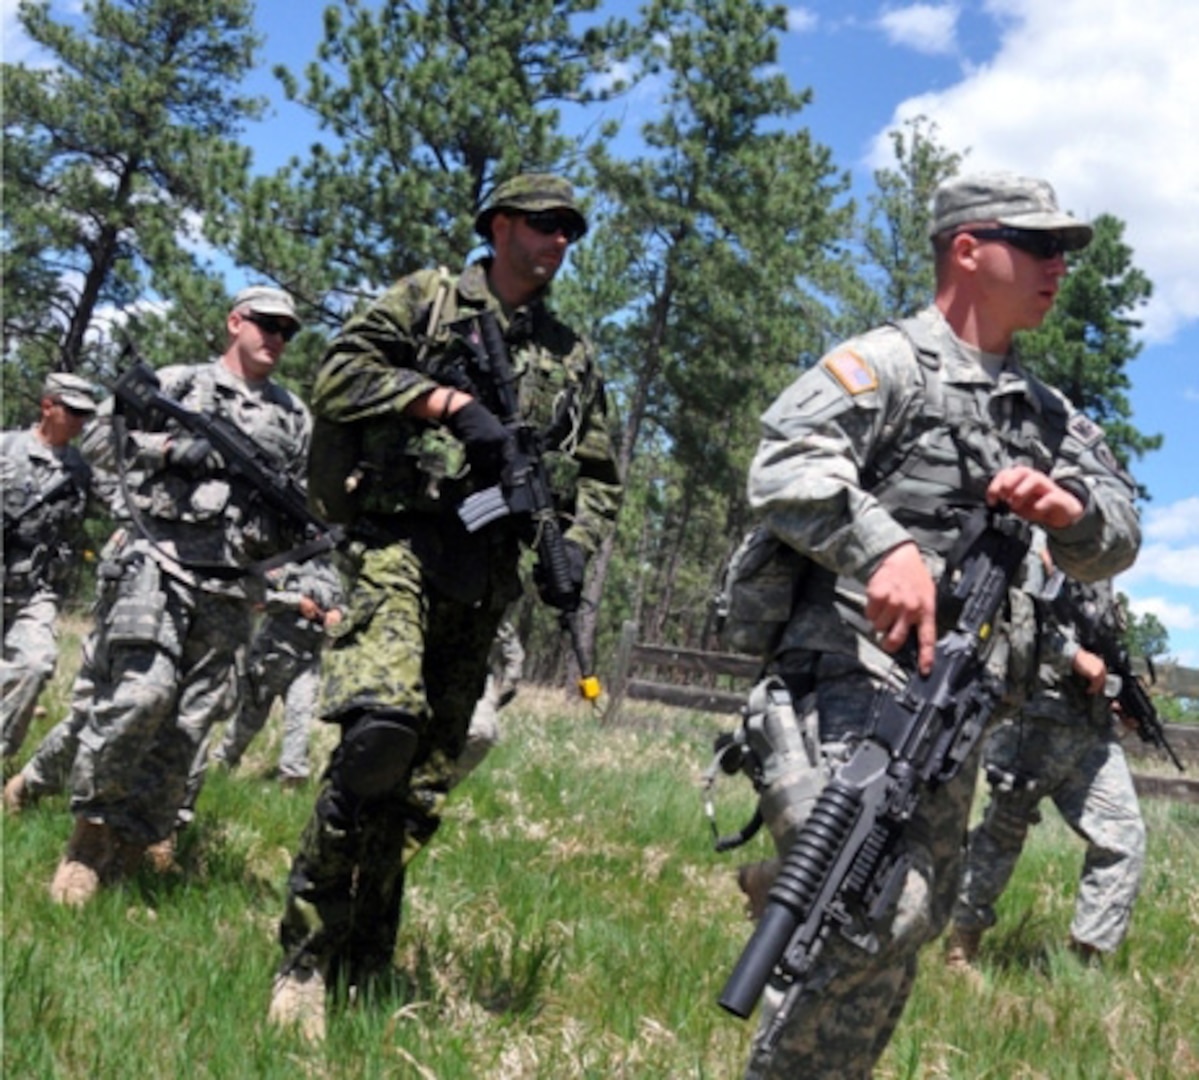 Soldiers from the 860th Military Police Company, Arizona Army National Guard, and the Danish Home Guard Force Protection Platoon, conduct a joint patrol on West Camp Rapid during the Golden Coyote training exercise June 10, 2012, near Rapid City, S.D. National Guard, U.S. Reserve and international forces use the exercise as an opportunity to conduct joint training in support of overseas contingency operations and homeland defense.